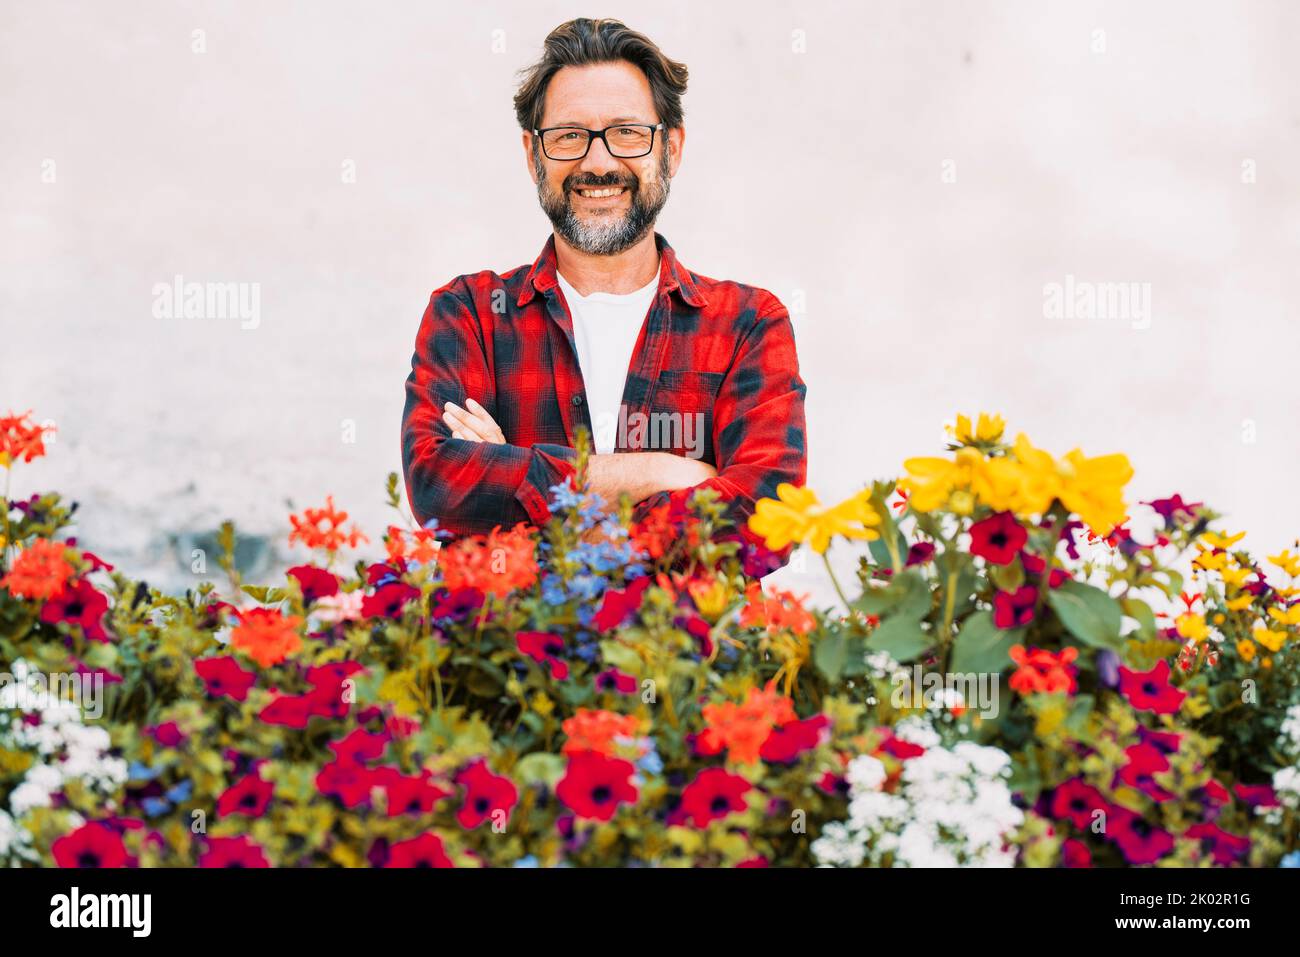 Portrait of happy man florist smiling and posing with lot of blossom colorful flowers in front of him. White background. Concept of store business floreal nature. Spring concept business lifestyle male people Stock Photo